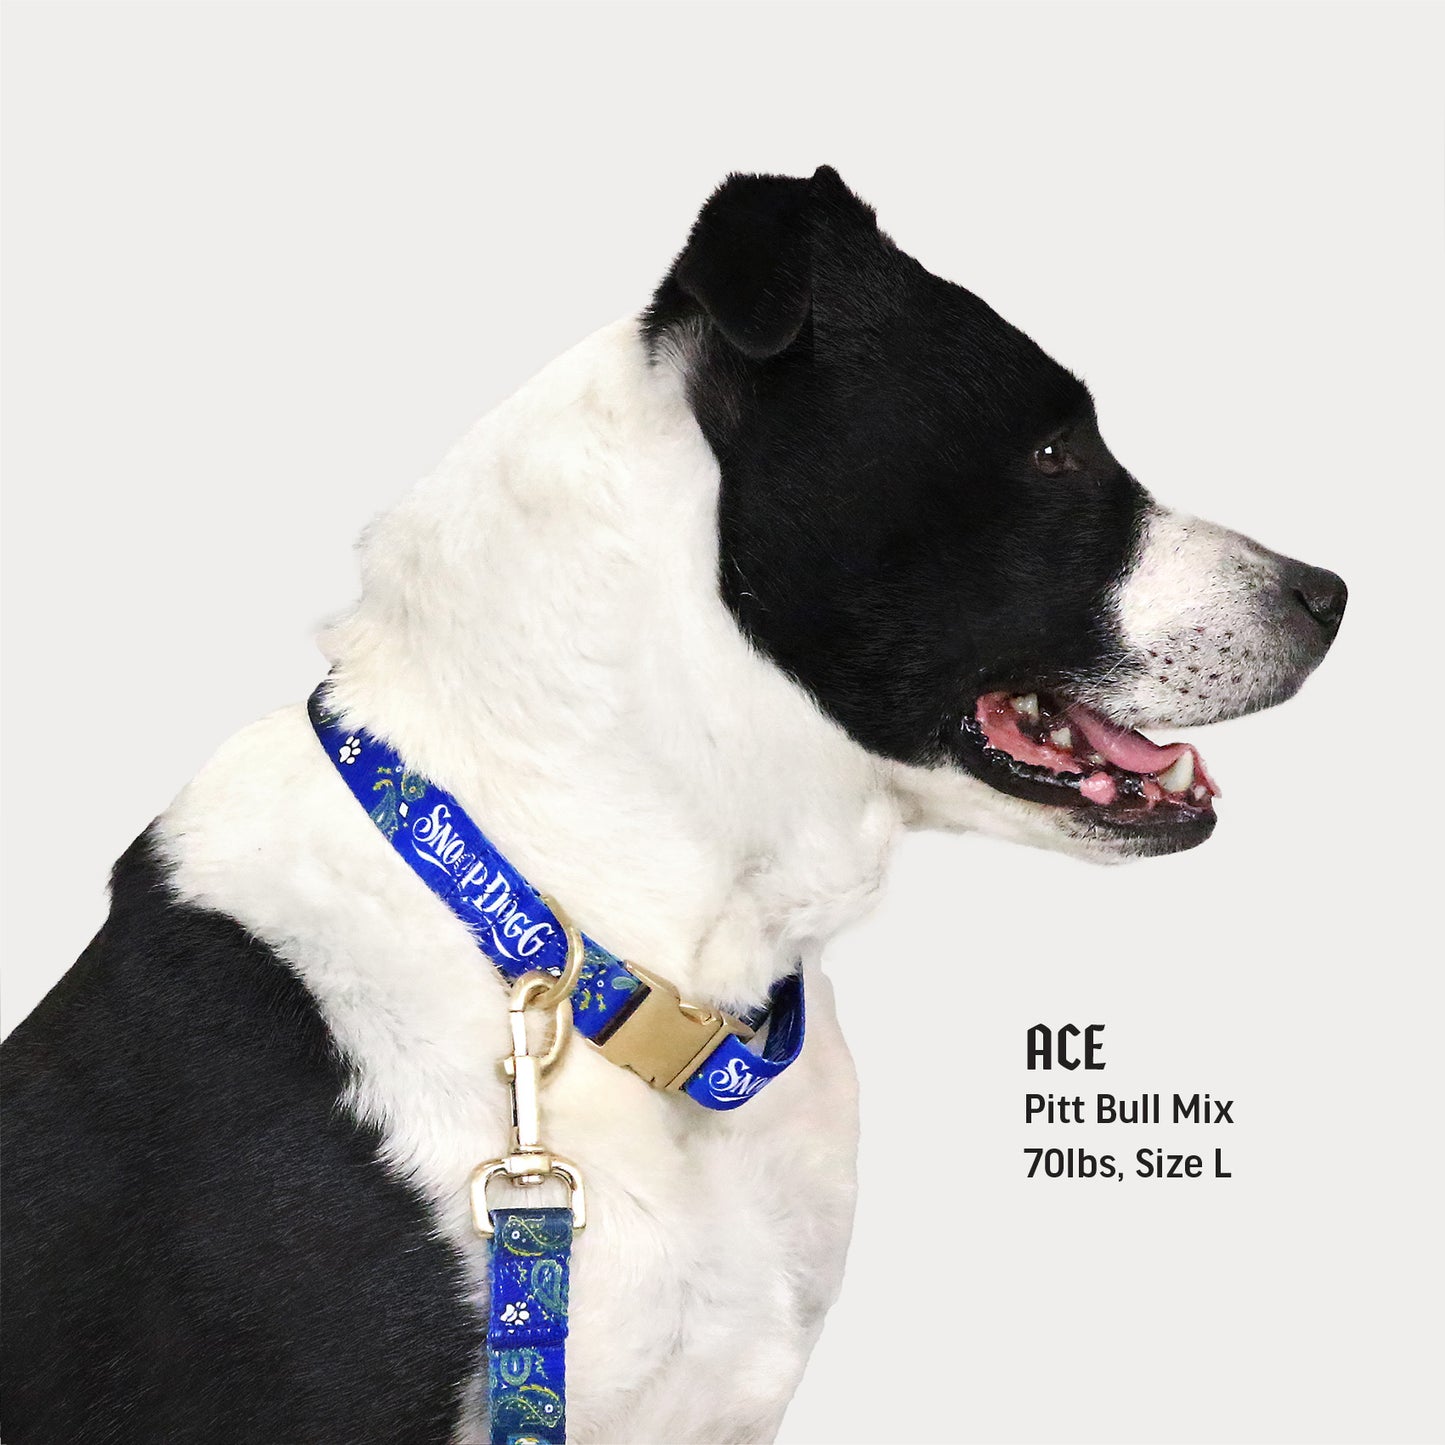 Ace the Pitt Bull Mix wearing the Halftime Deluxe Pet Collar in size Large.